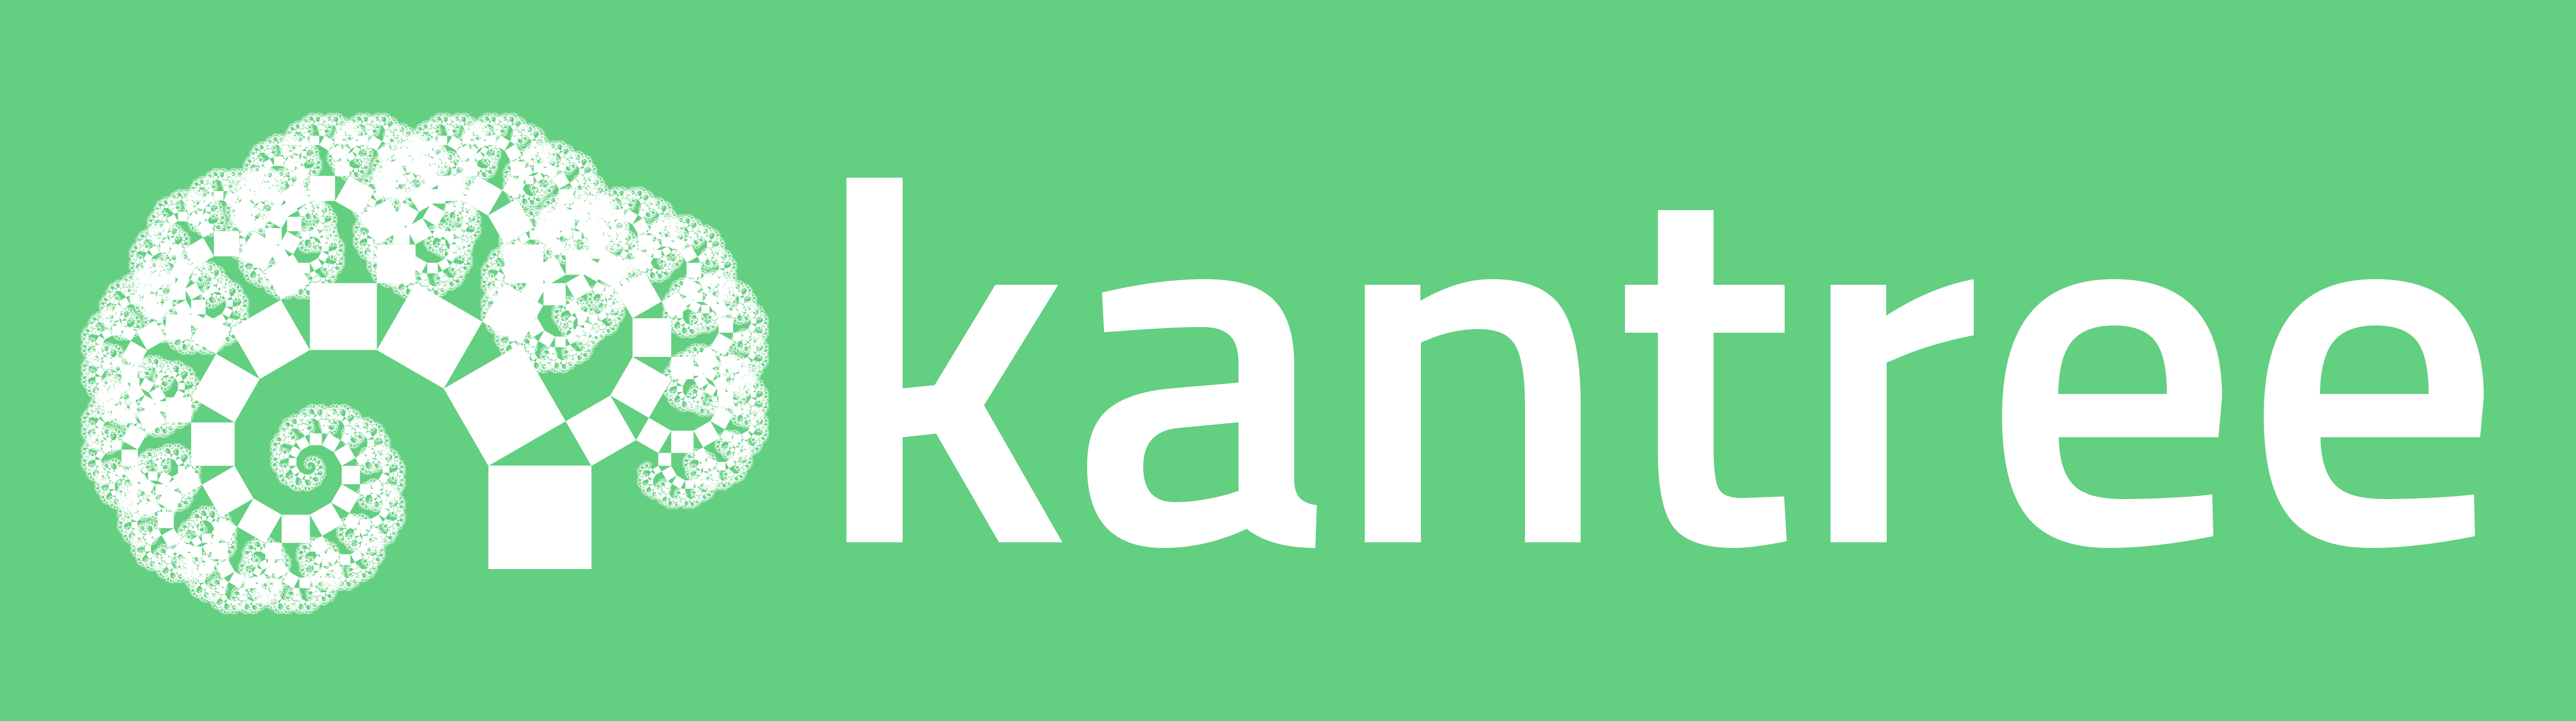 Work management platform Kantree extends its free trial to 90 days to support remote teams during the outbreak of COVID-19